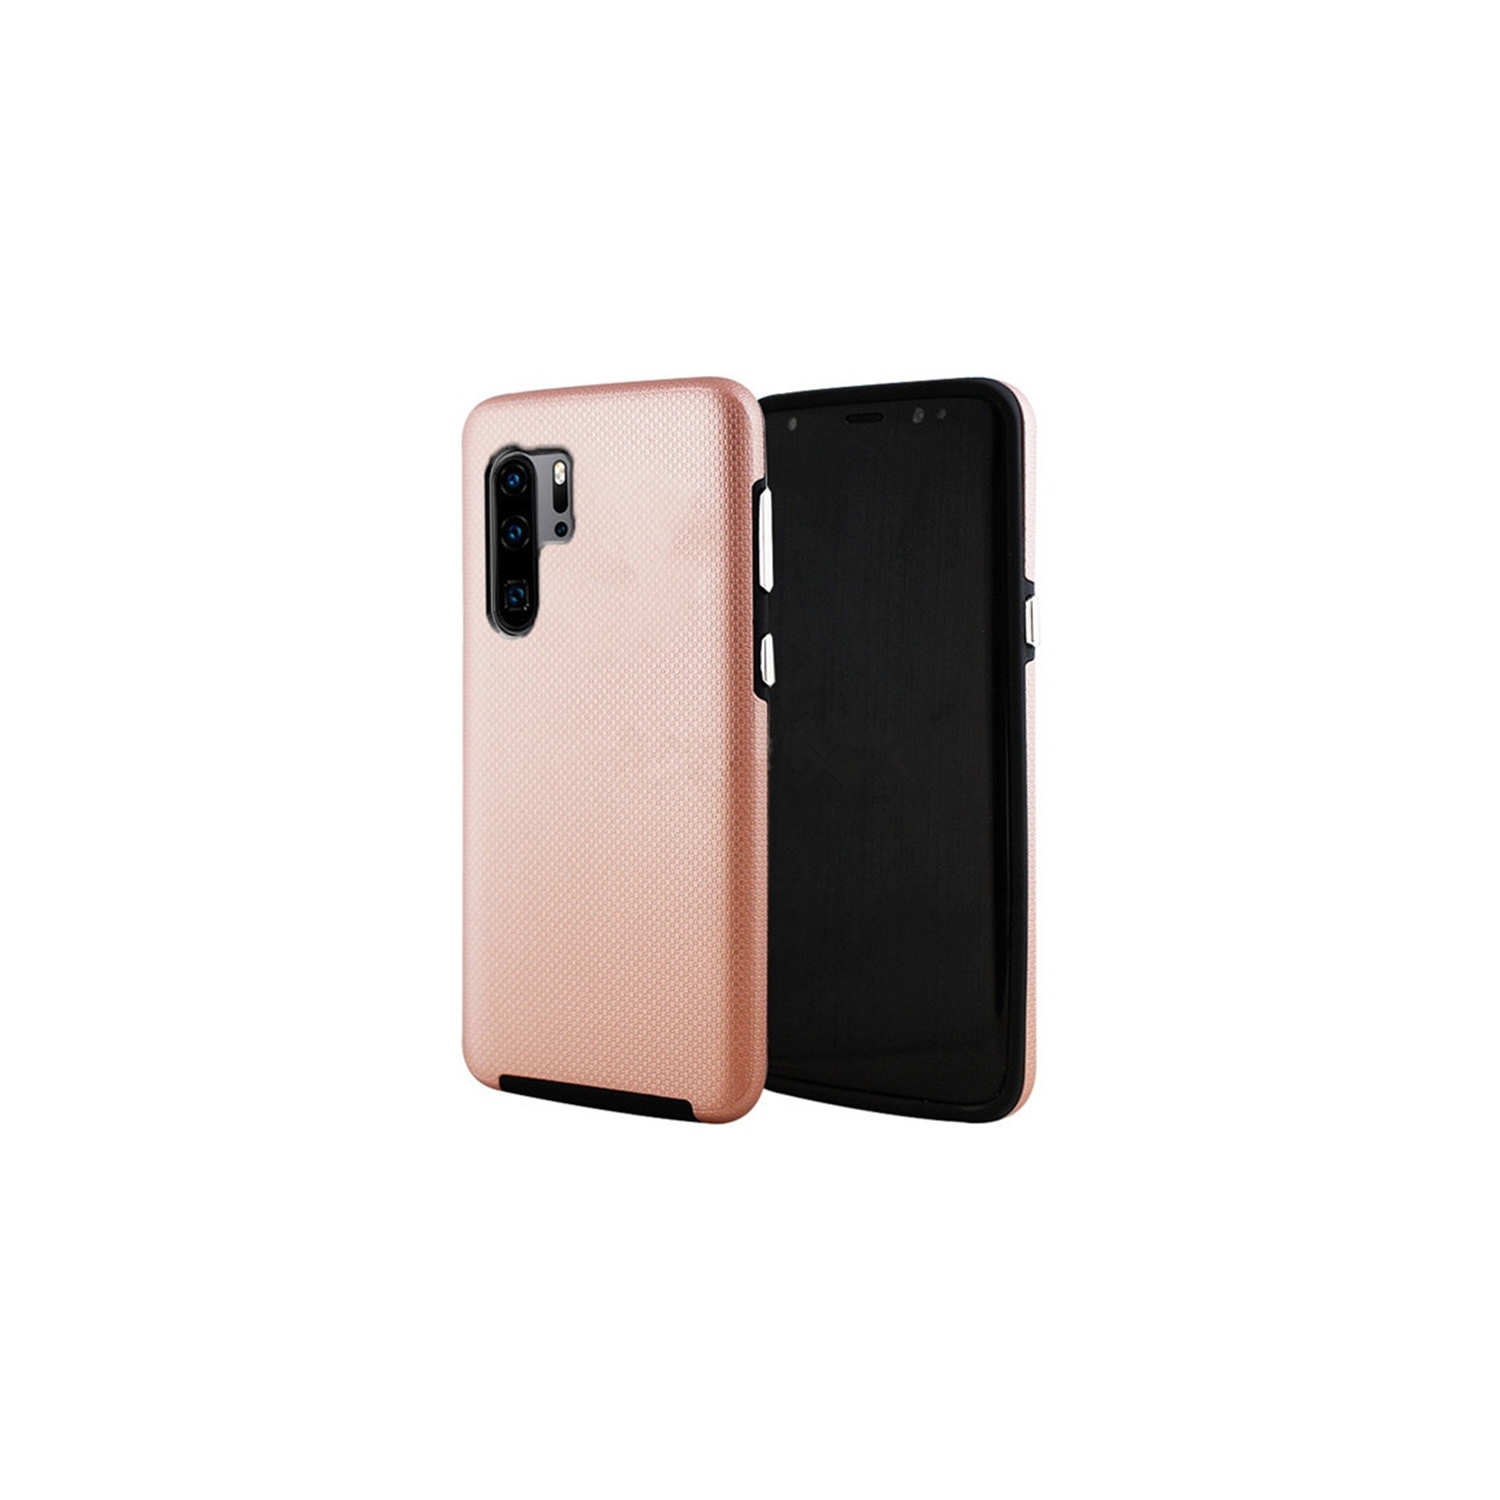 【CSmart】 Slim Fitted Hybrid Hard PC Shell Shockproof Scratch Resistant Case Cover for Samsung Galaxy Note 10 Plus, Rose Gold